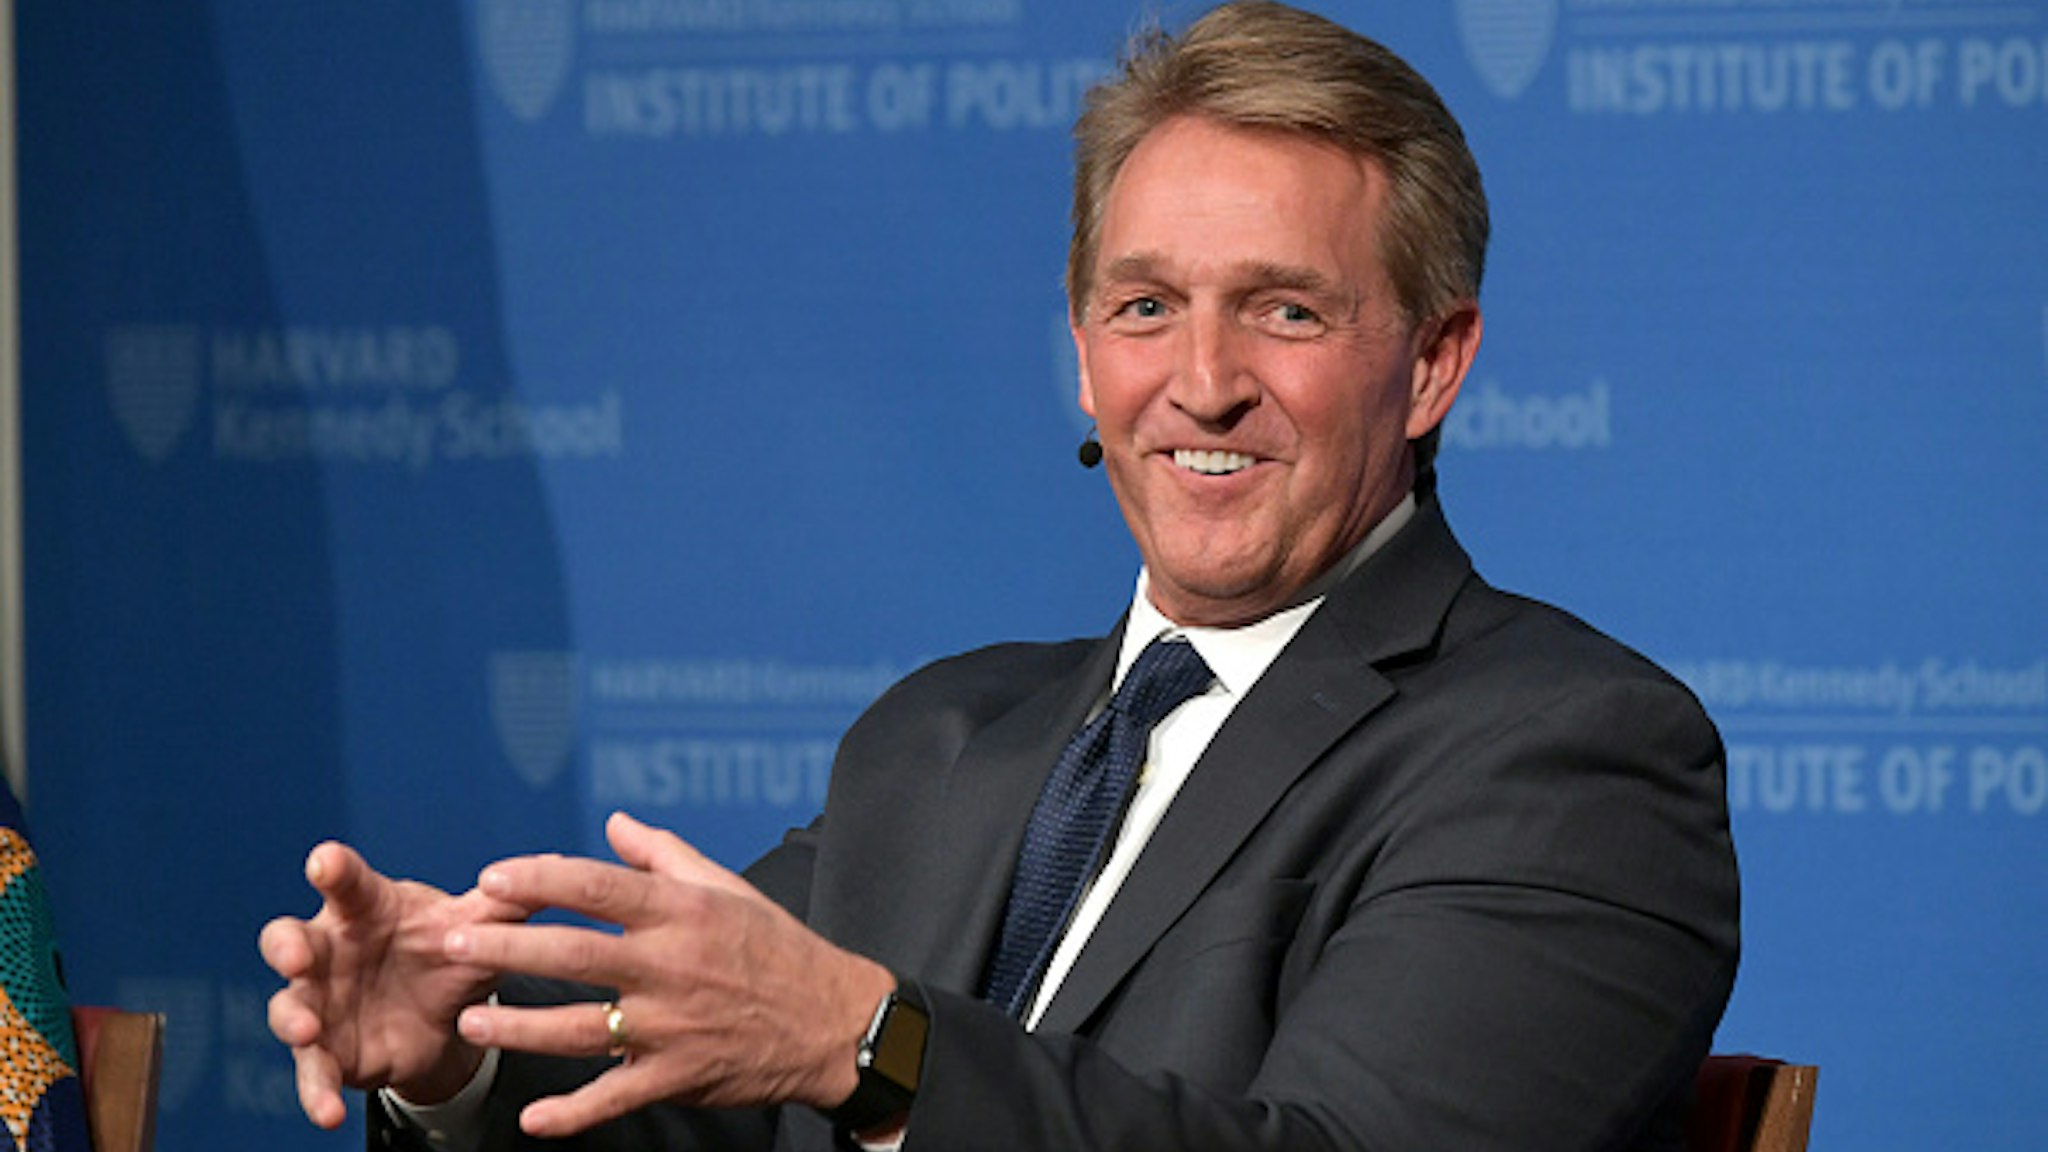 CAMBRIDGE, MA - MARCH 01: Former Arizona Senator Jeff Flake speaks at the Harvard Kennedy School of Government in a program titled 'Strengthening Democratic Institutions' at Harvard University on March 1, 2019 in Cambridge, Massachusetts.